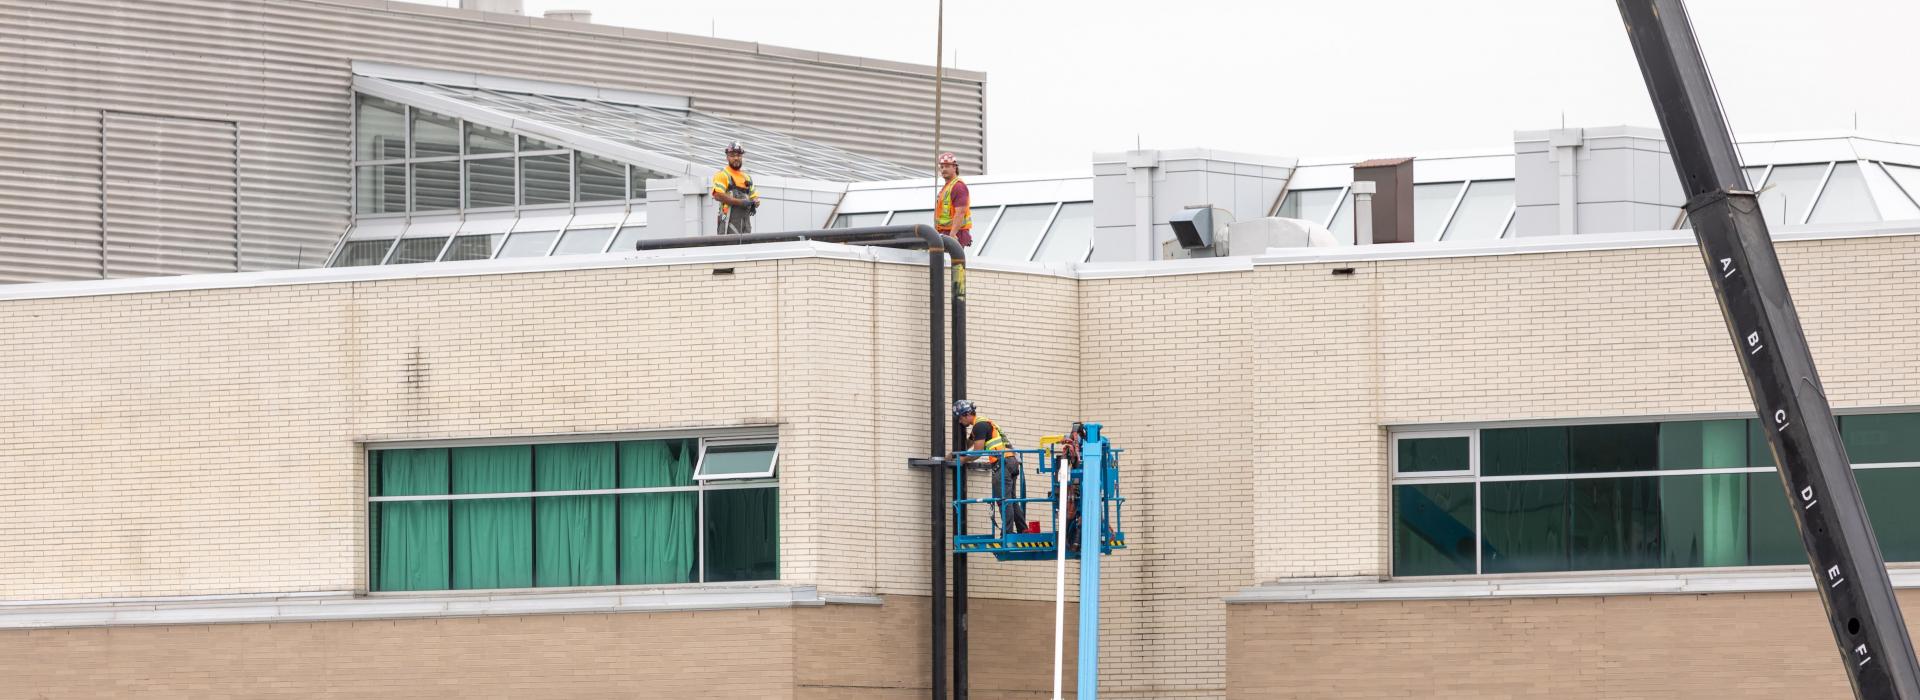 Workers on roof of Guelph Humber building installing pipes